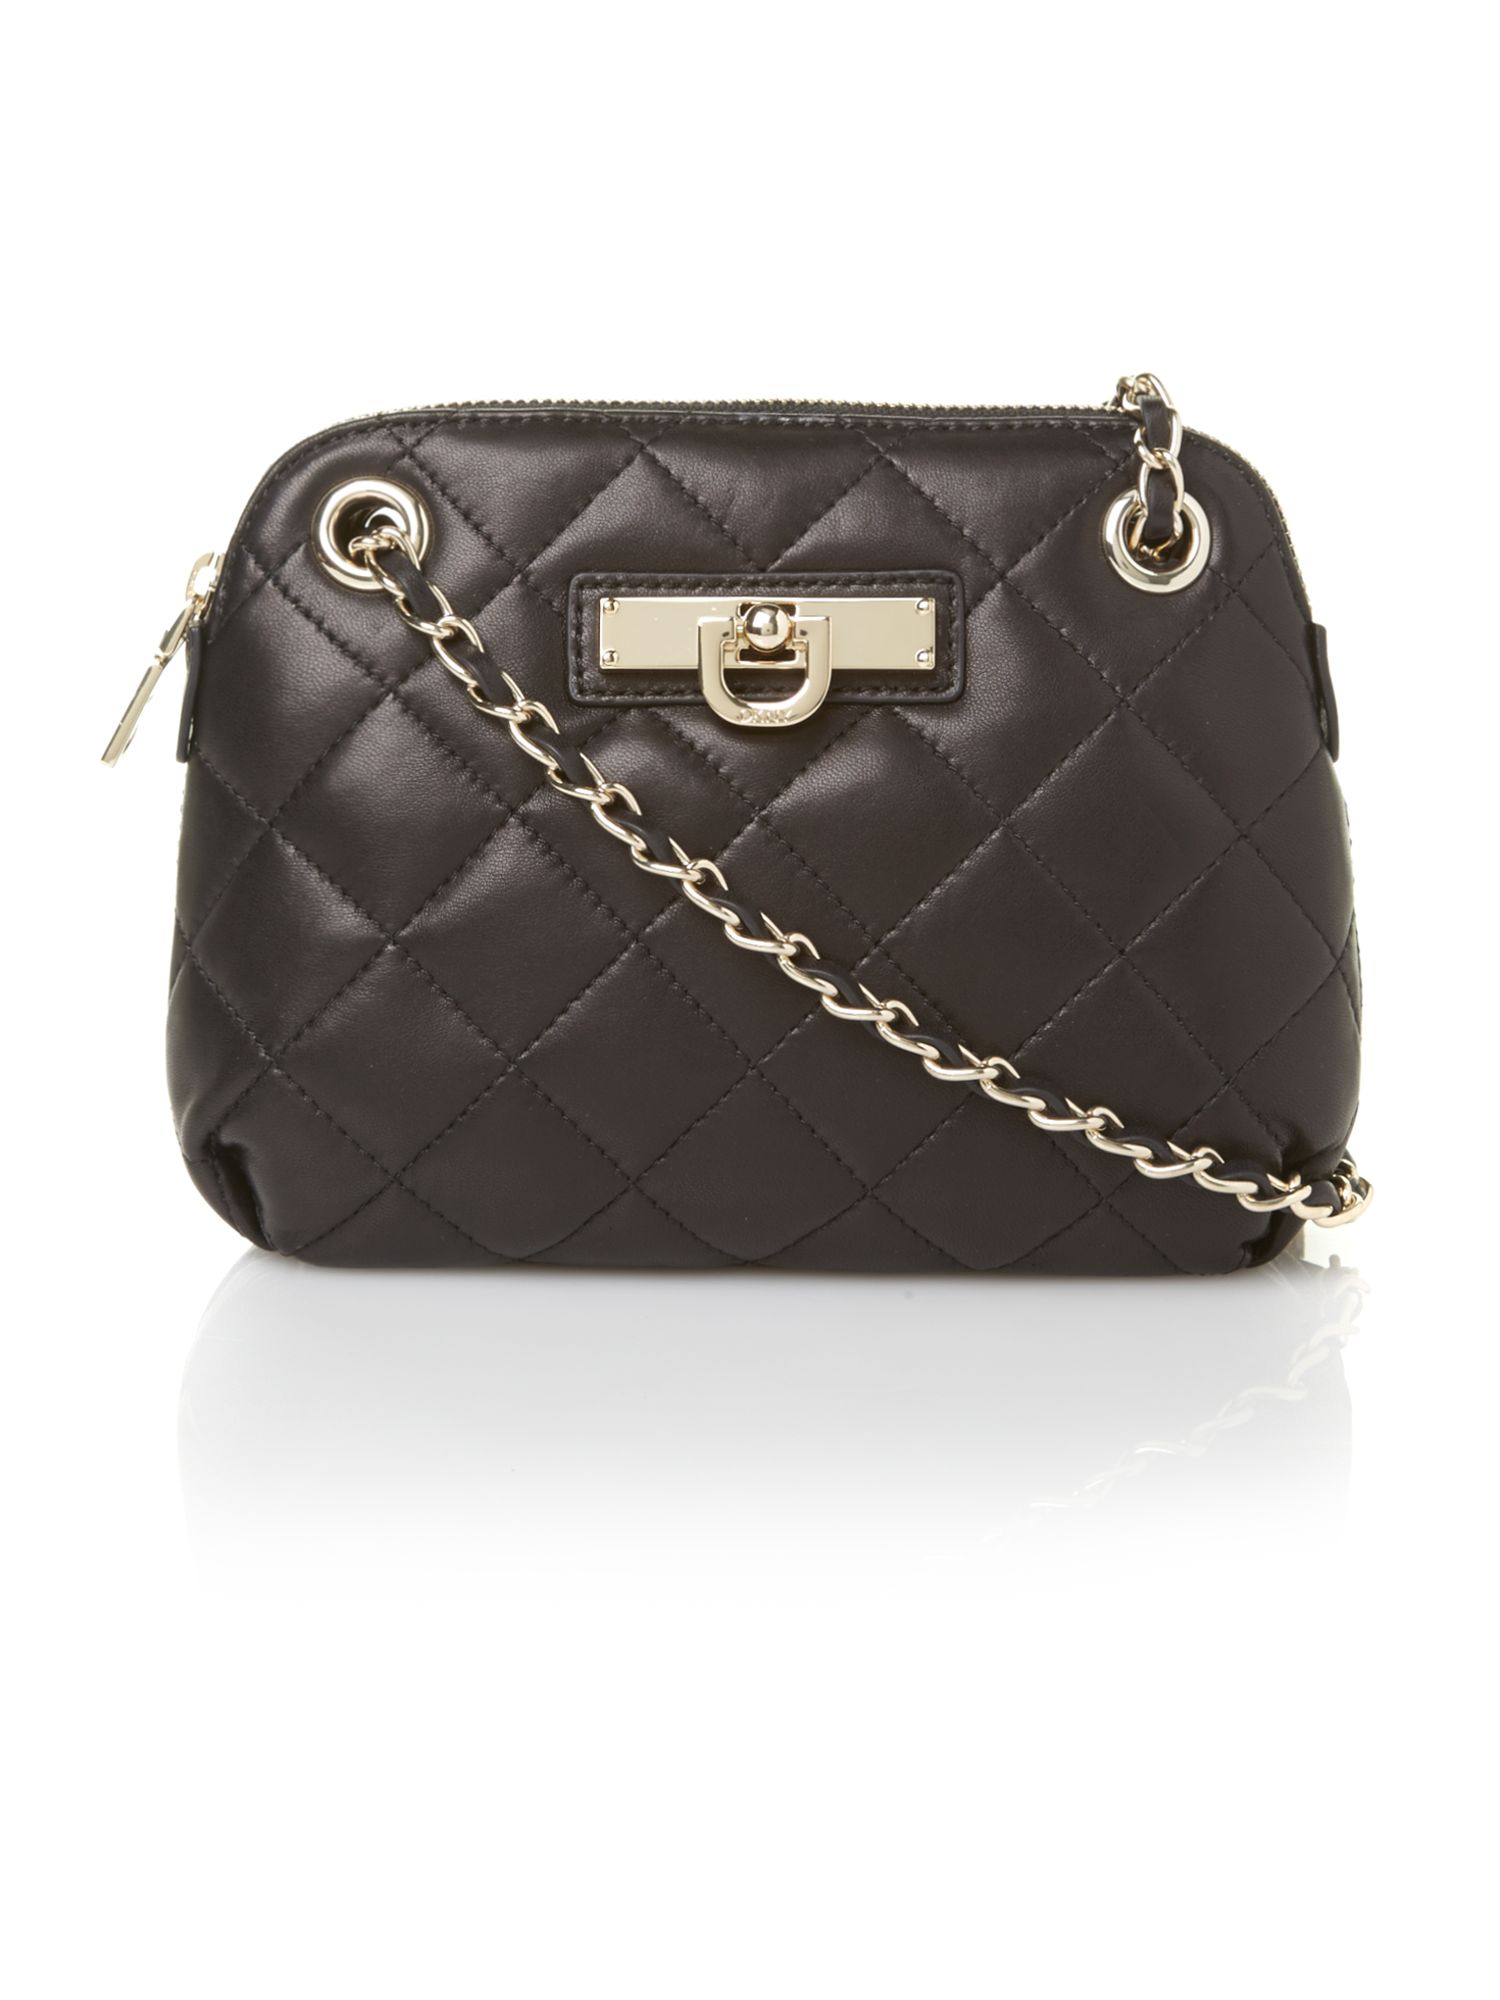 Dkny Items Quilted Black Small Crossbody Bag in Black | Lyst